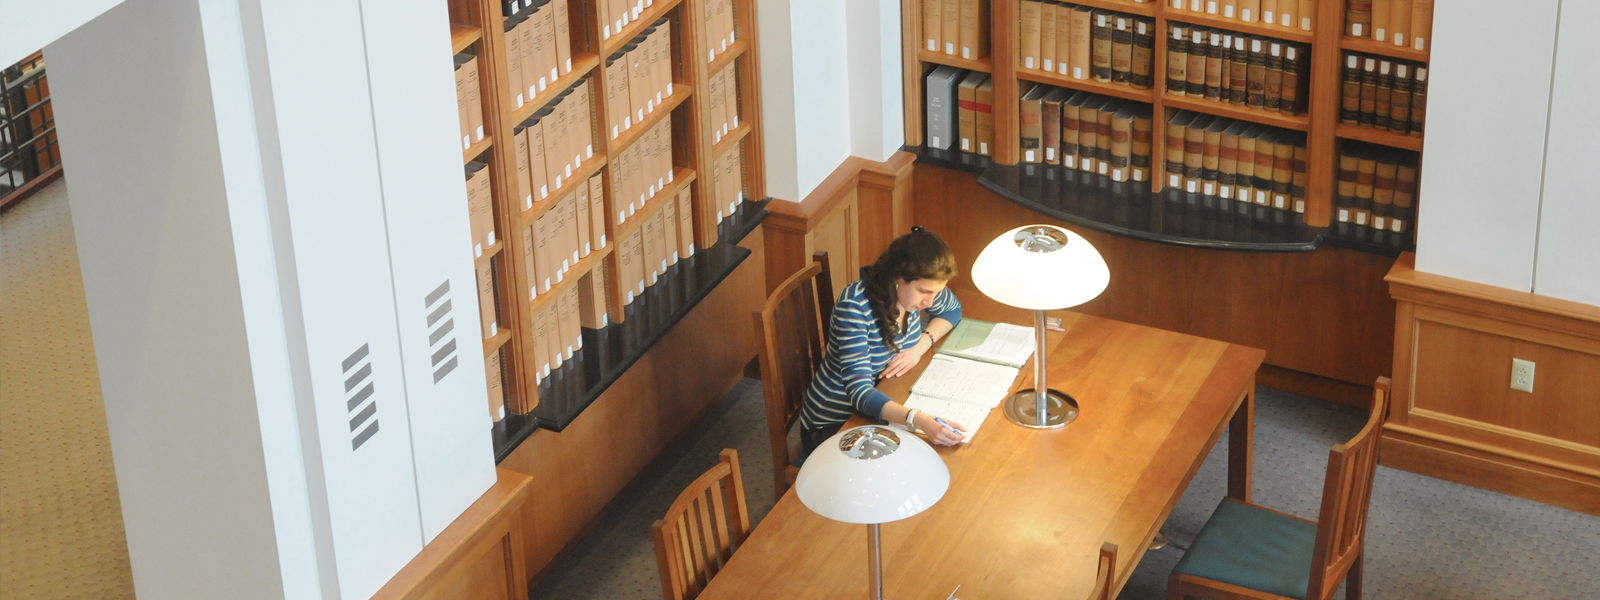 law student studying in the library